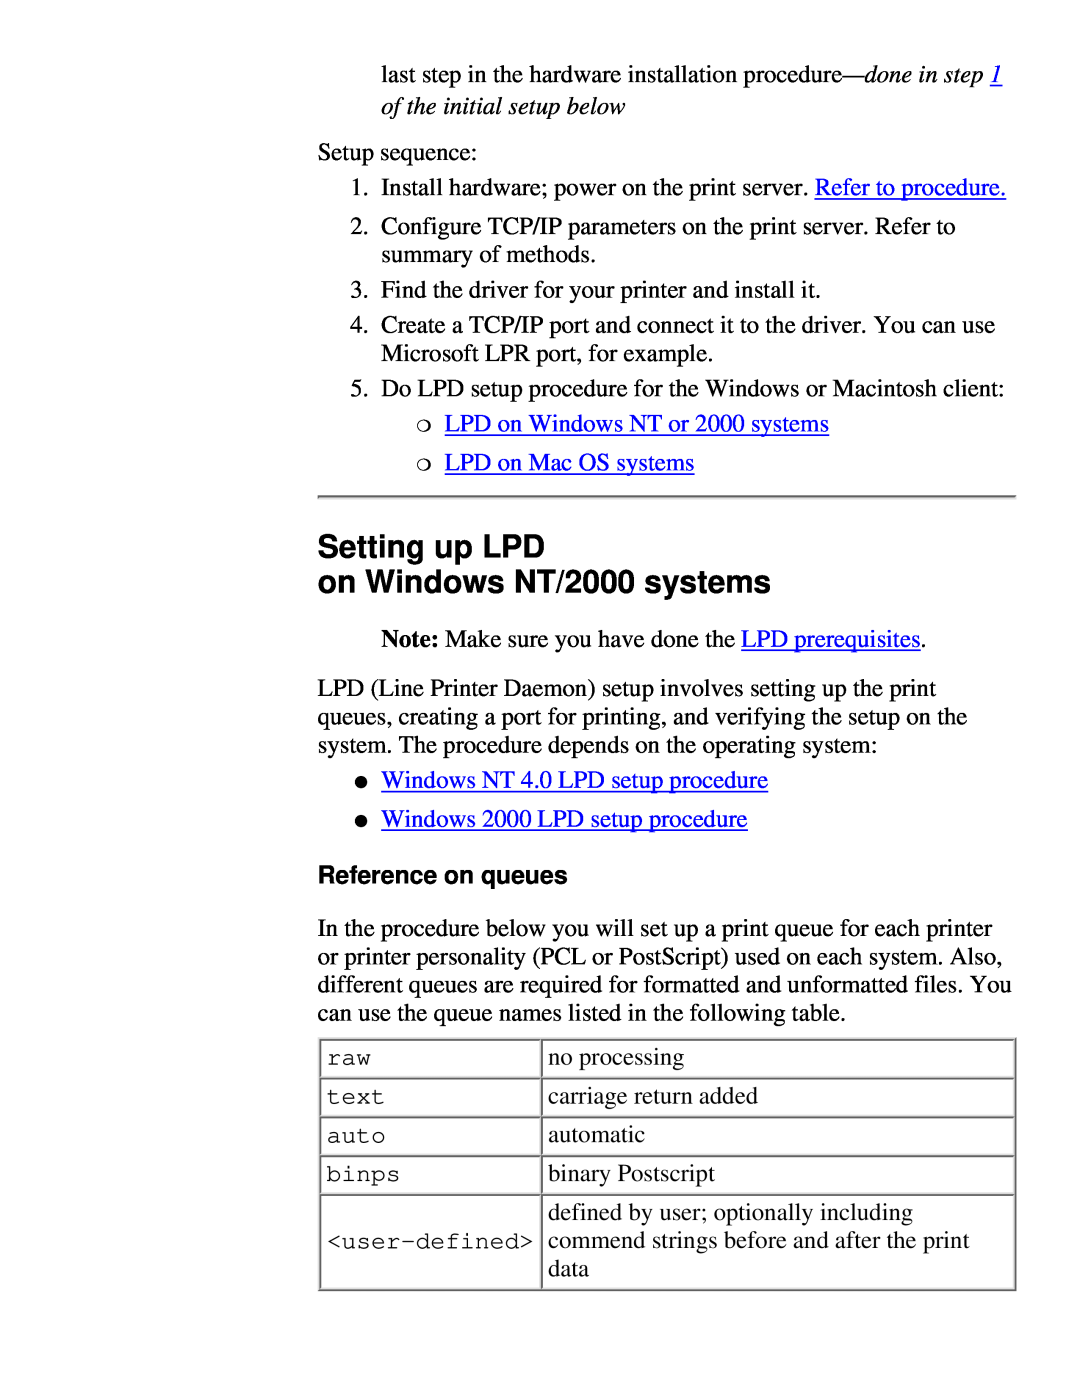 HP 175X, 310X manual Setting up LPD on Windows NT/2000 systems, of the initial setup below, Reference on queues 